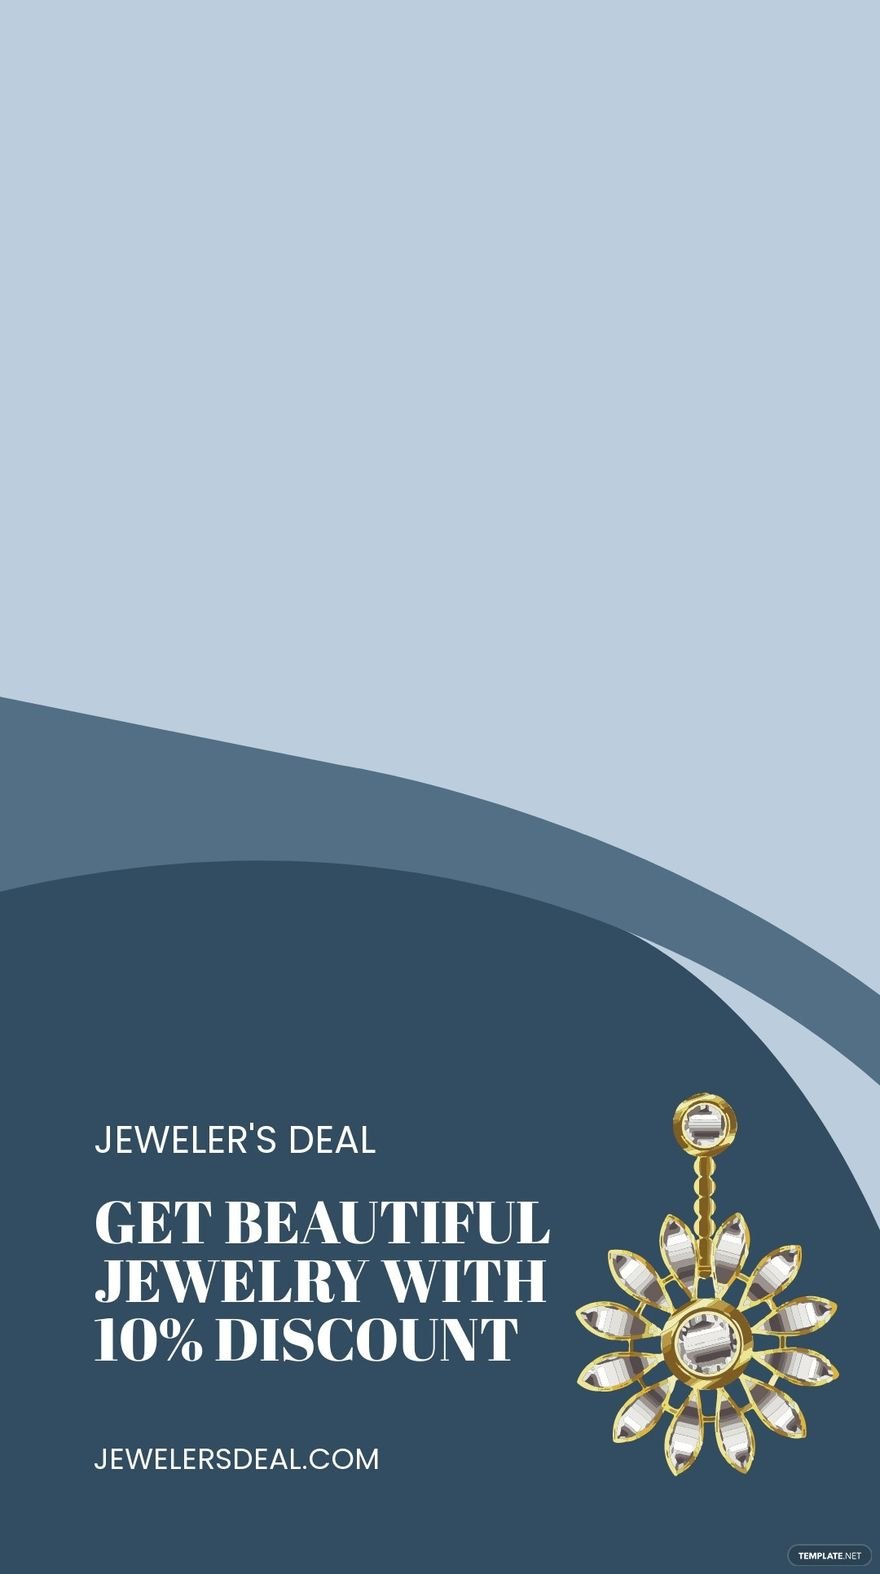 Free Jewelry Discount Snapchat Geofilter Template